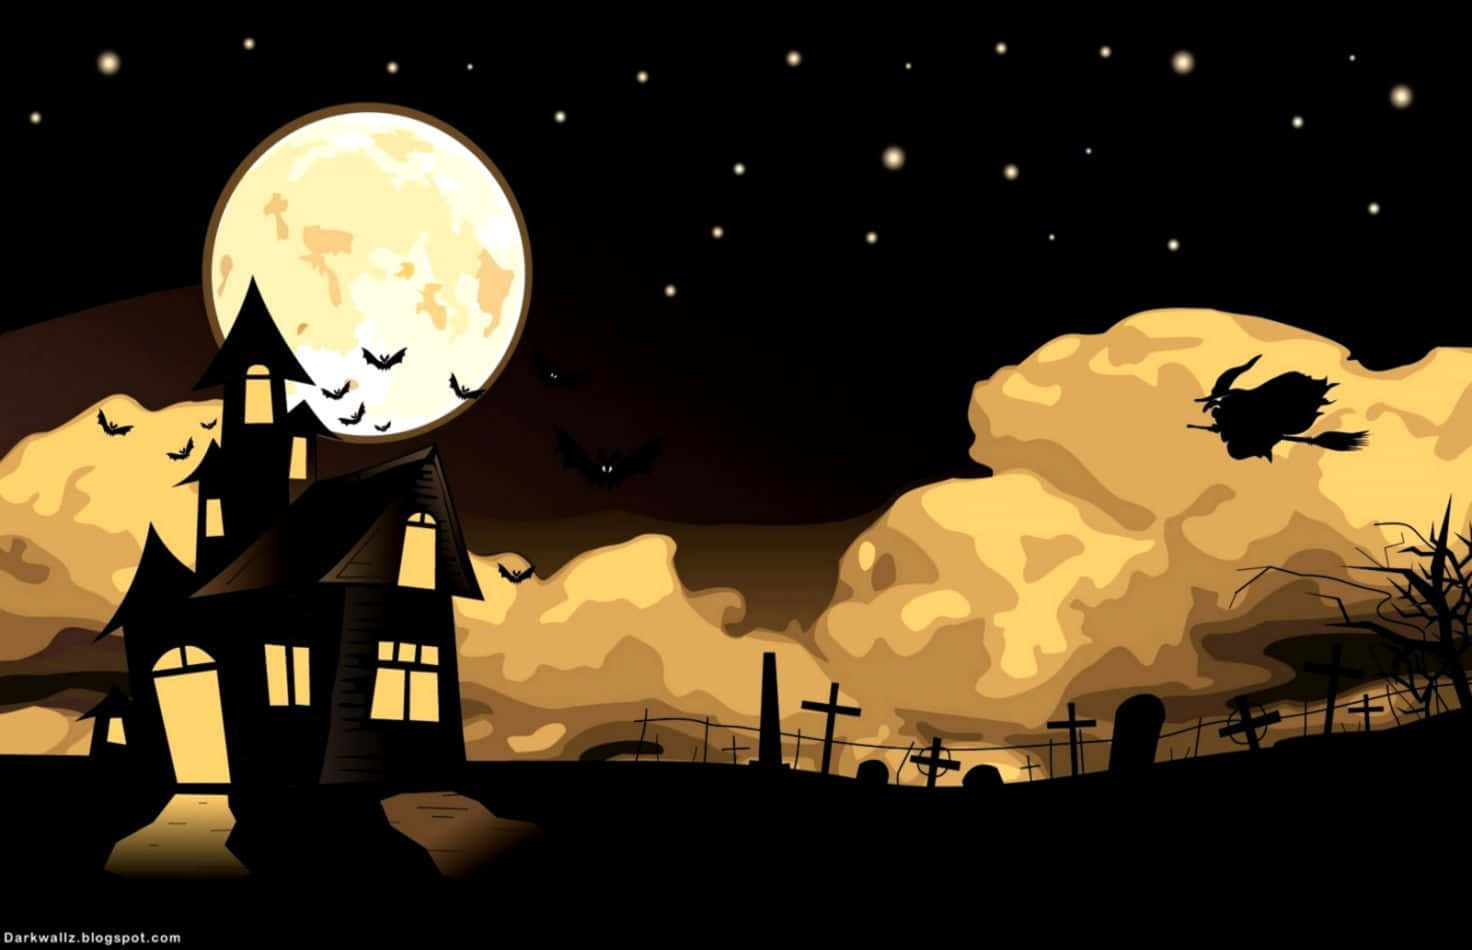 Spread Some Spooky Joy This Halloween! Background